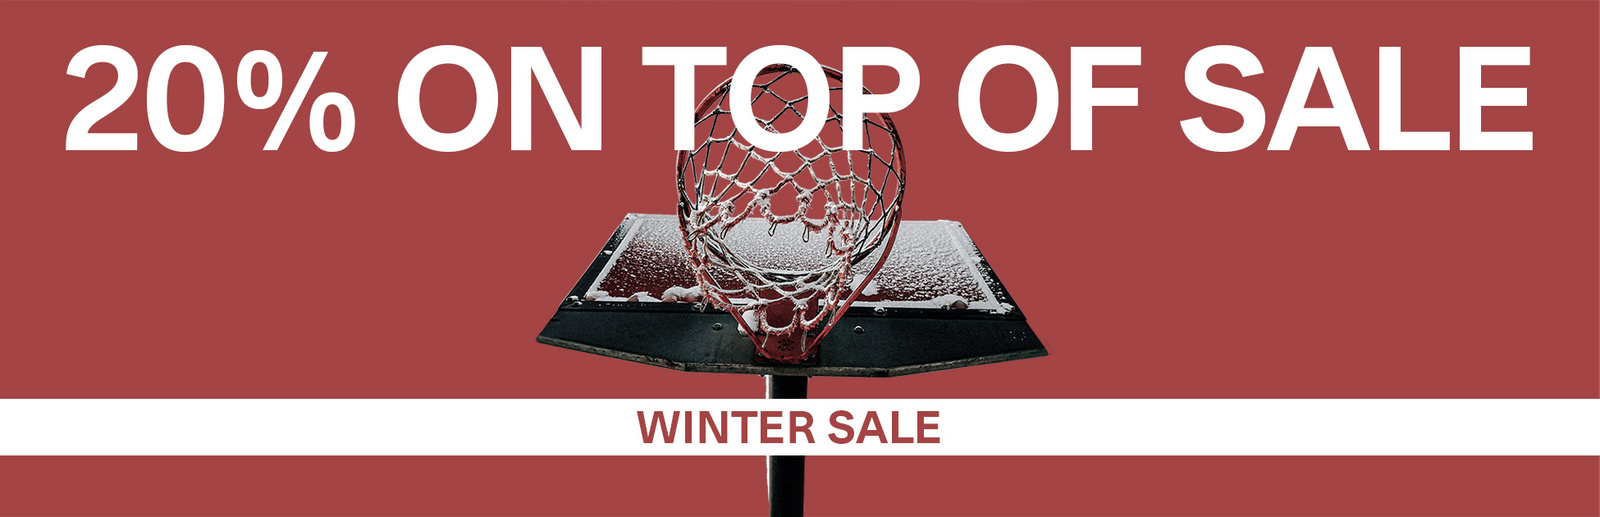 WINTER SALE 2023 - 20% ON TOP RELATING SALE